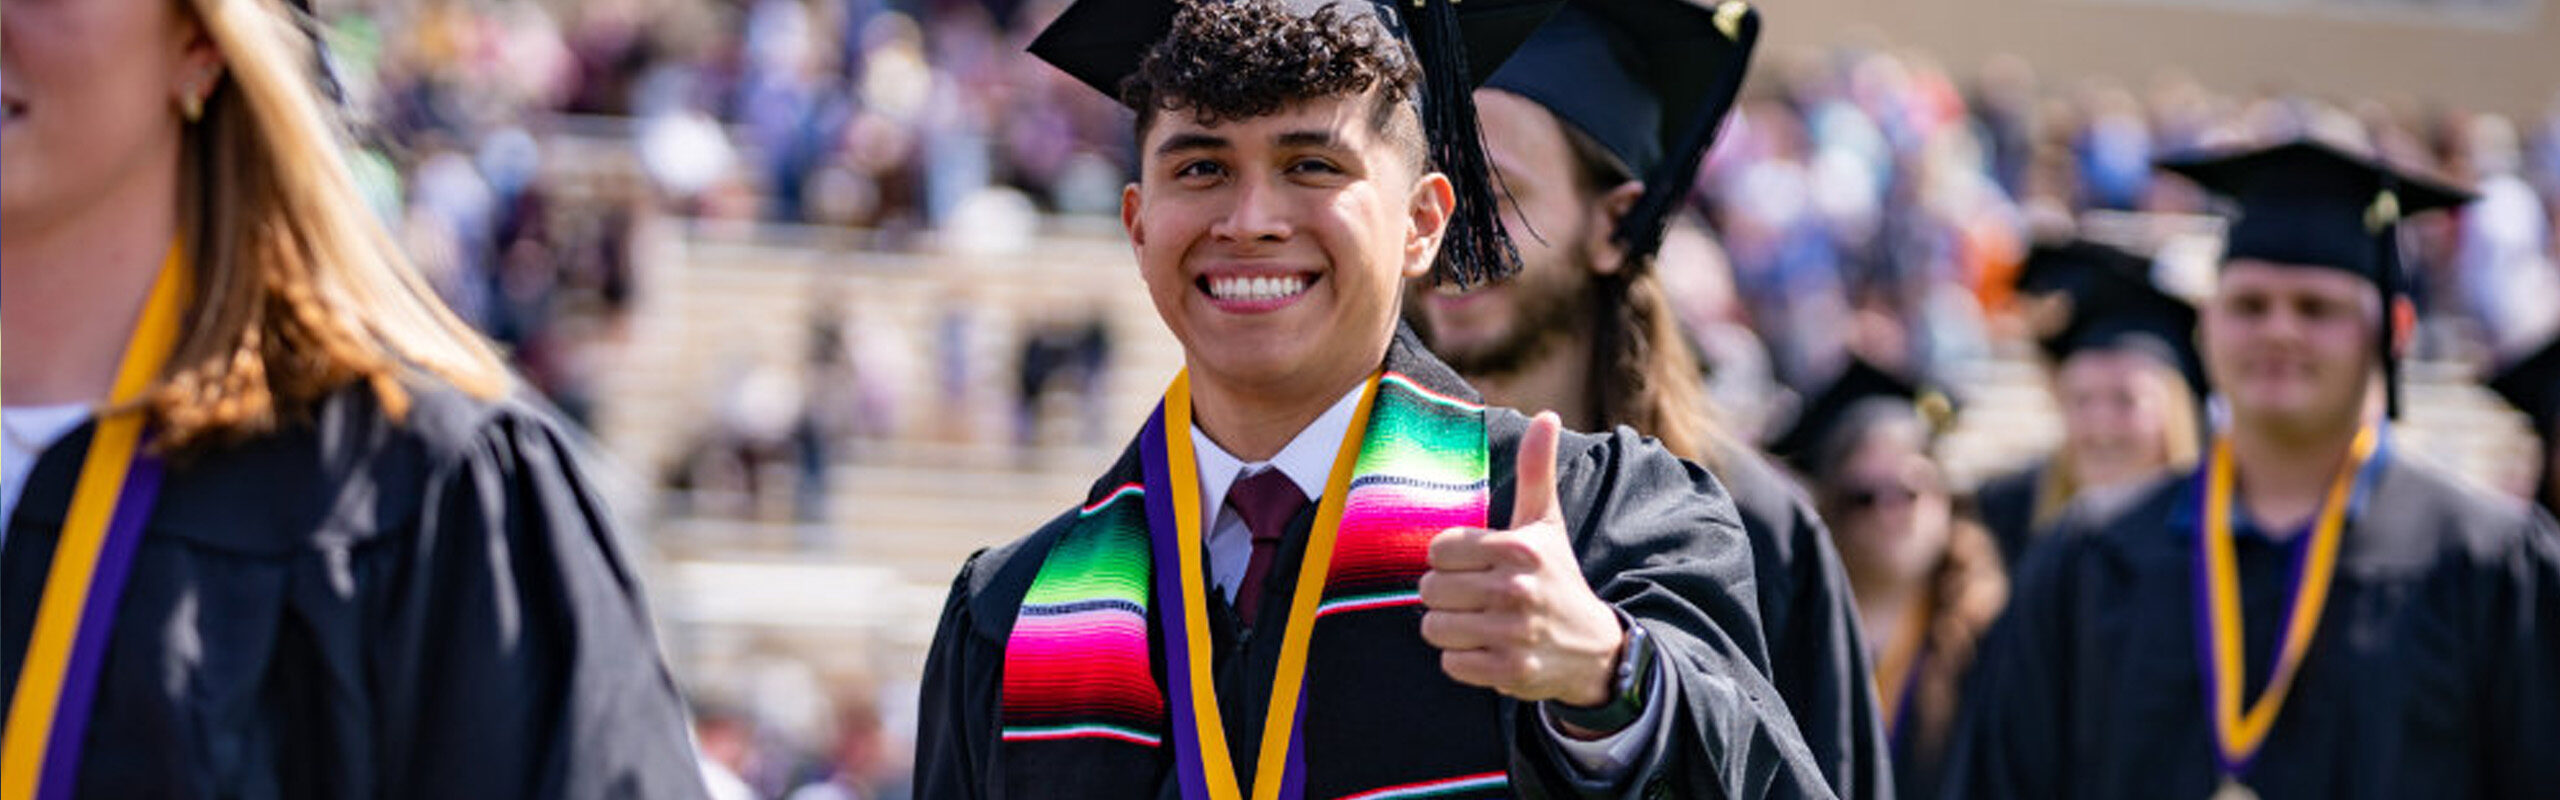 Loras male student showcasing international scarf during Commencement